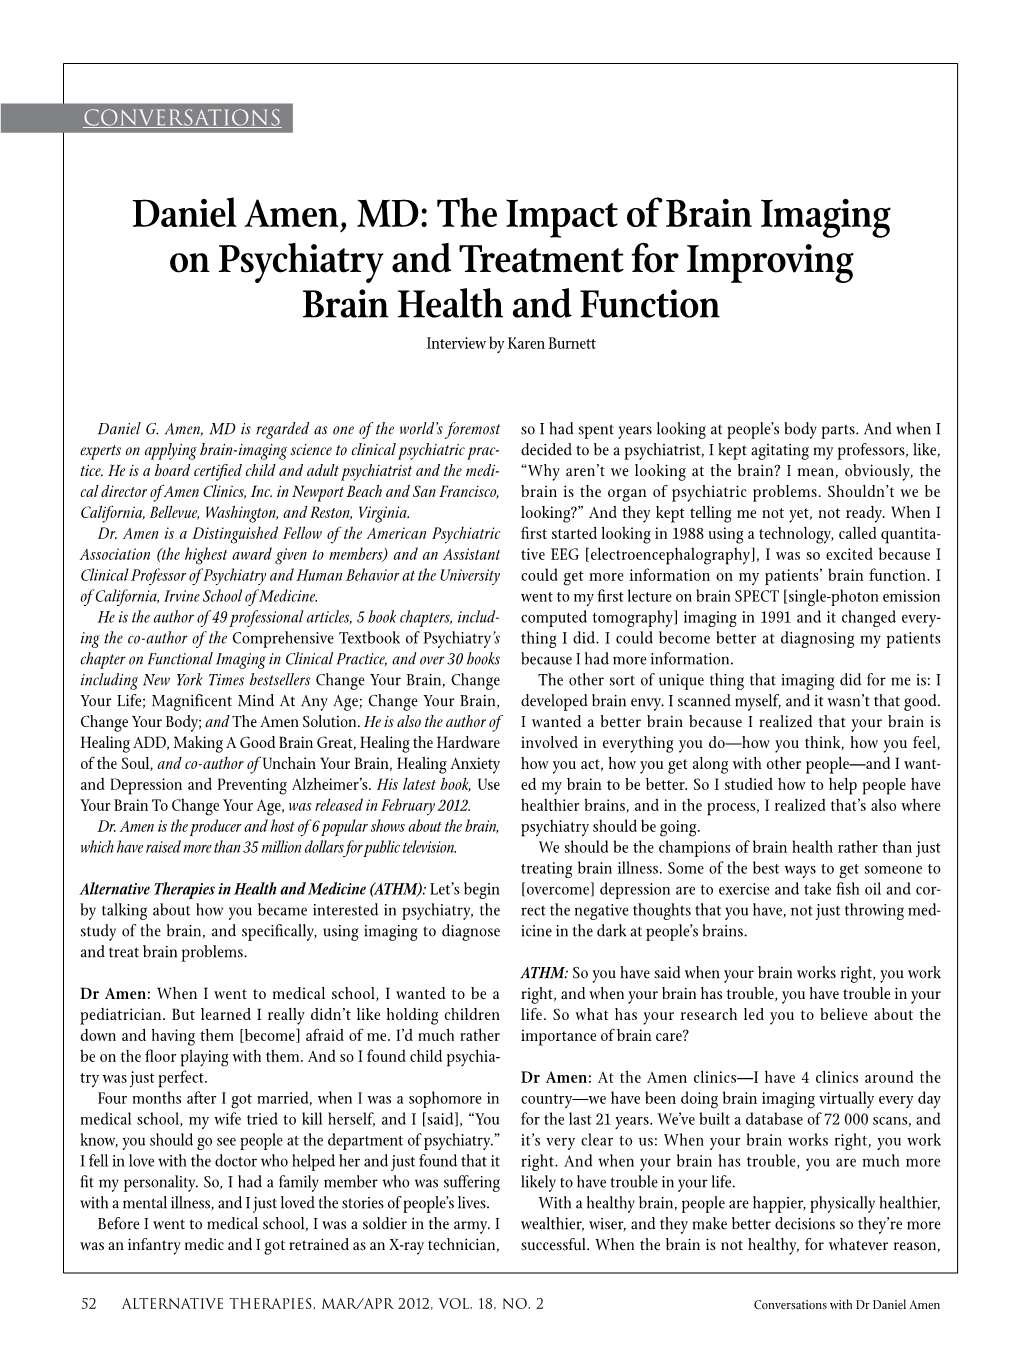 Daniel Amen, MD: the Impact of Brain Imaging on Psychiatry and Treatment for Improving Brain Health and Function Interview by Karen Burnett